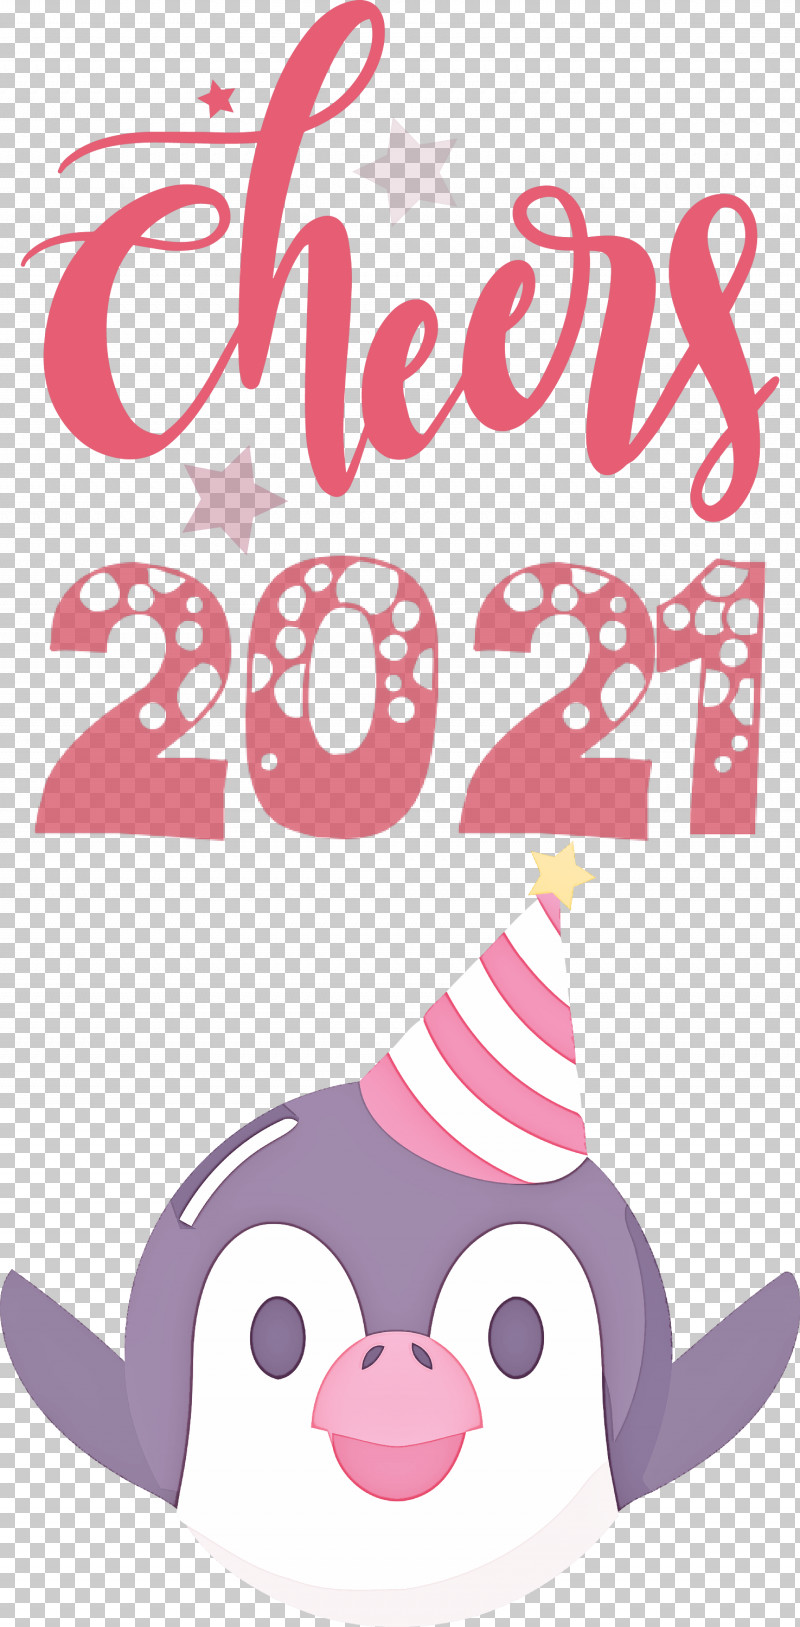 Cheers 2021 New Year Cheers.2021 New Year PNG, Clipart, Biology, Cartoon, Cheers 2021 New Year, Geometry, Line Free PNG Download